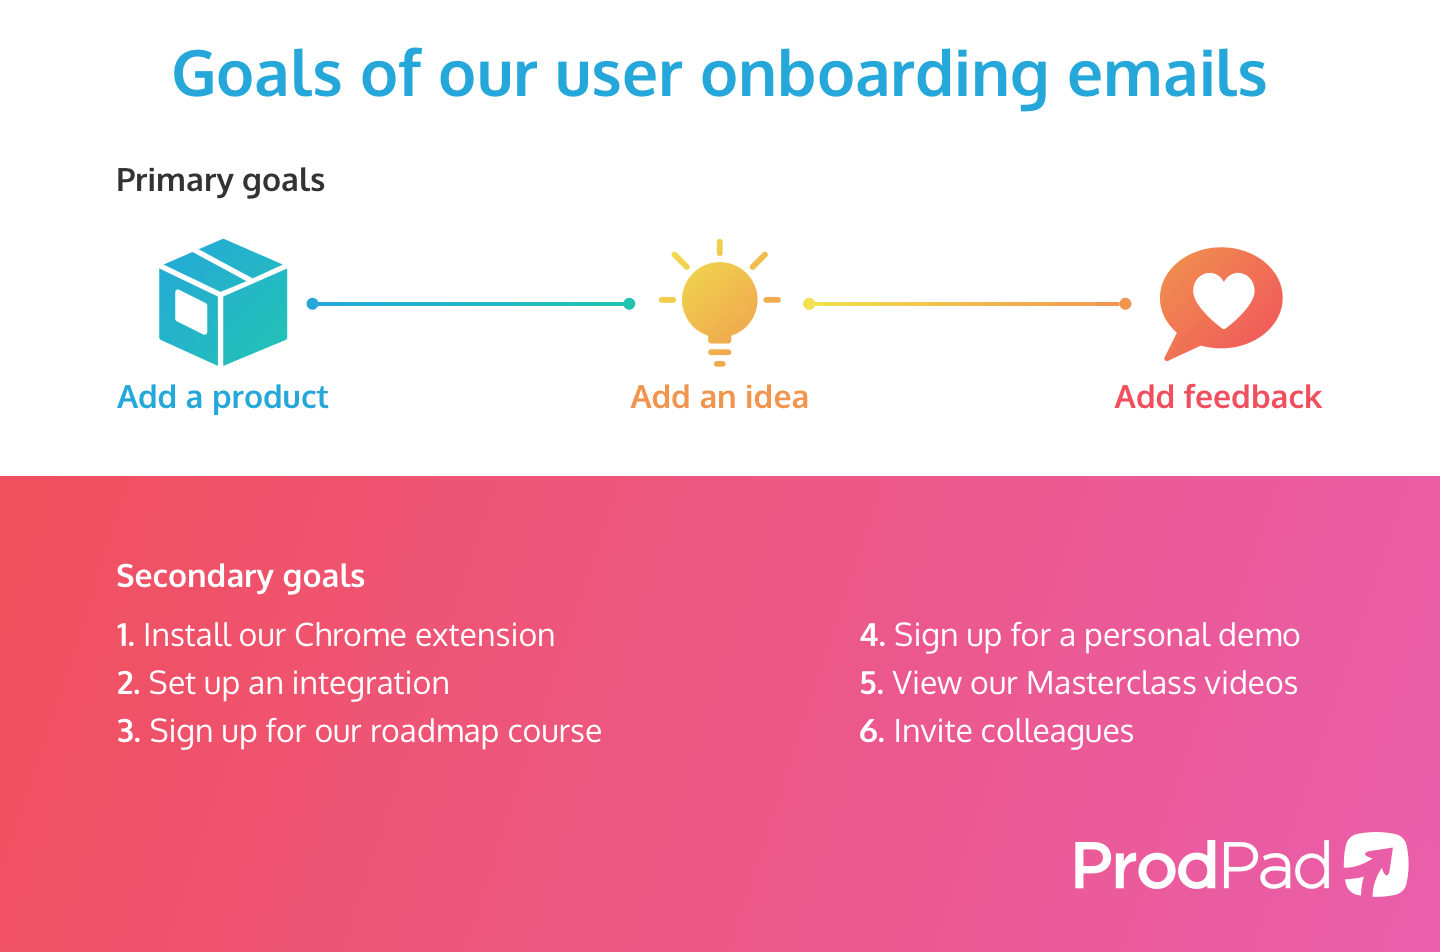 The goals of our user onboarding emails